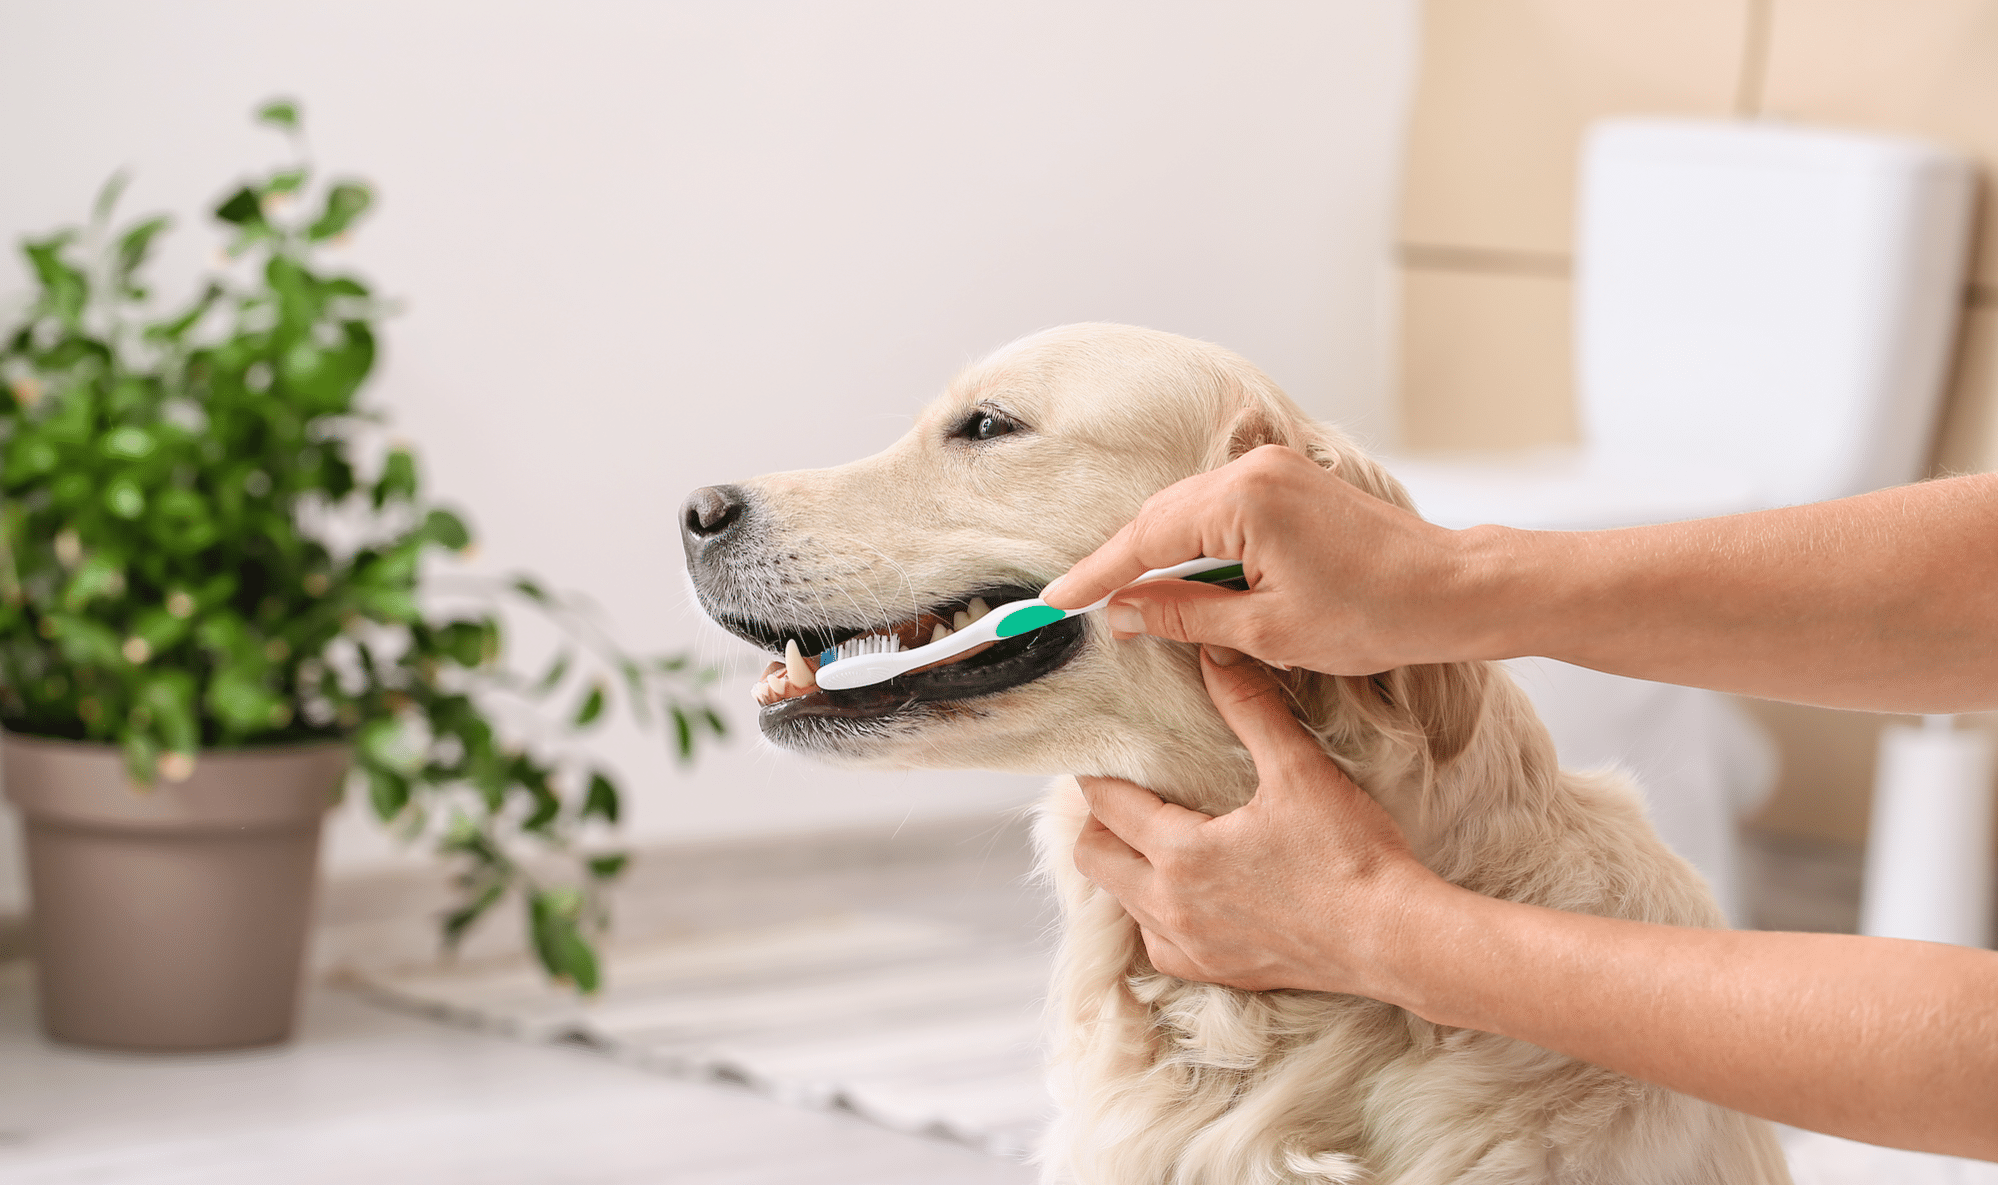 Dog Teeth Cleaning: Ensuring Your Pup’s Dental Health